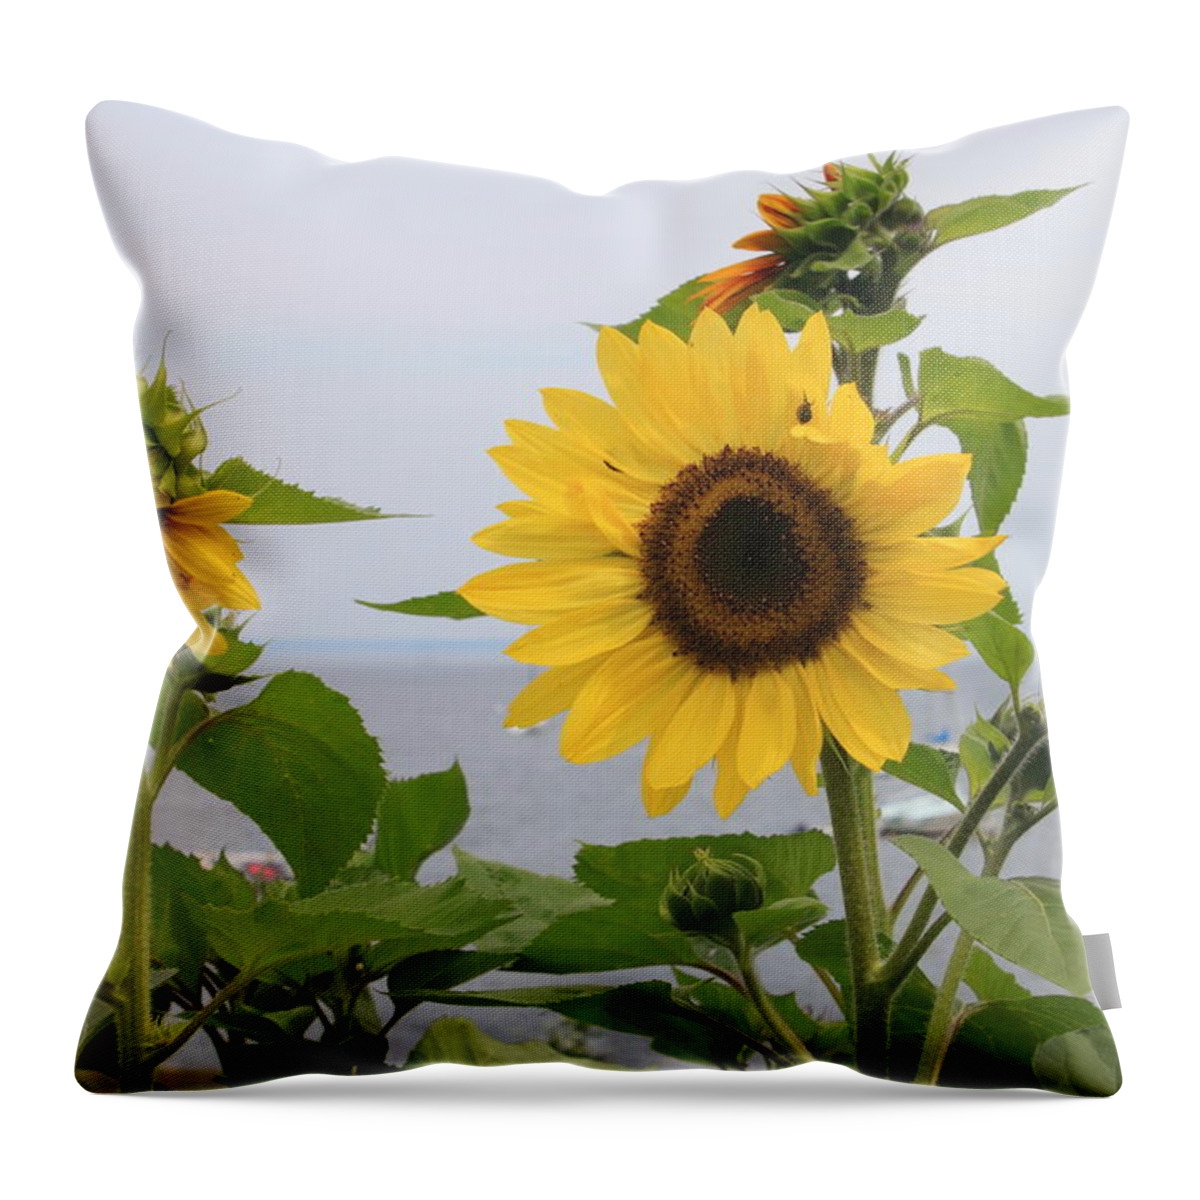 Wildflower Throw Pillow featuring the photograph Sunflowers by the Ocean by John Burk